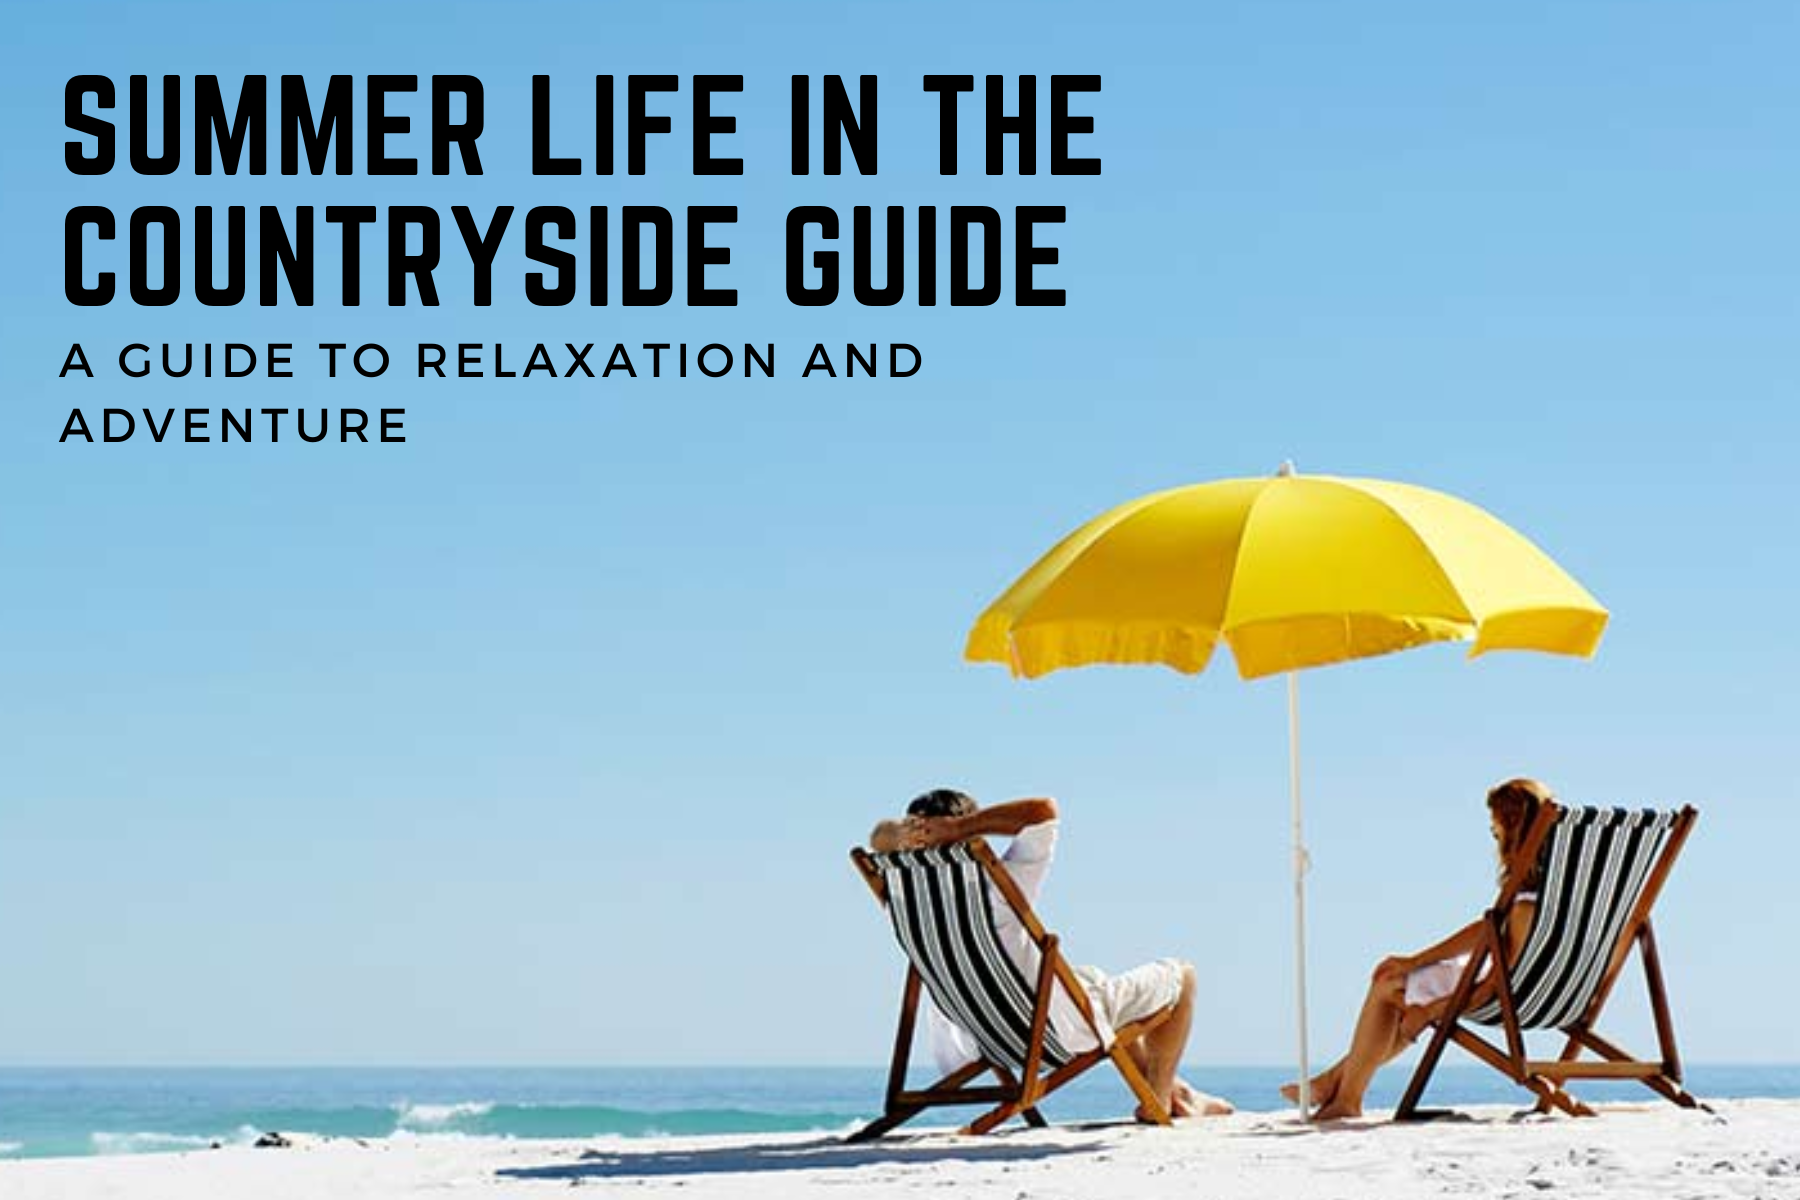 Summer Life In The Countryside Guide - A Guide To Relaxation And Adventure